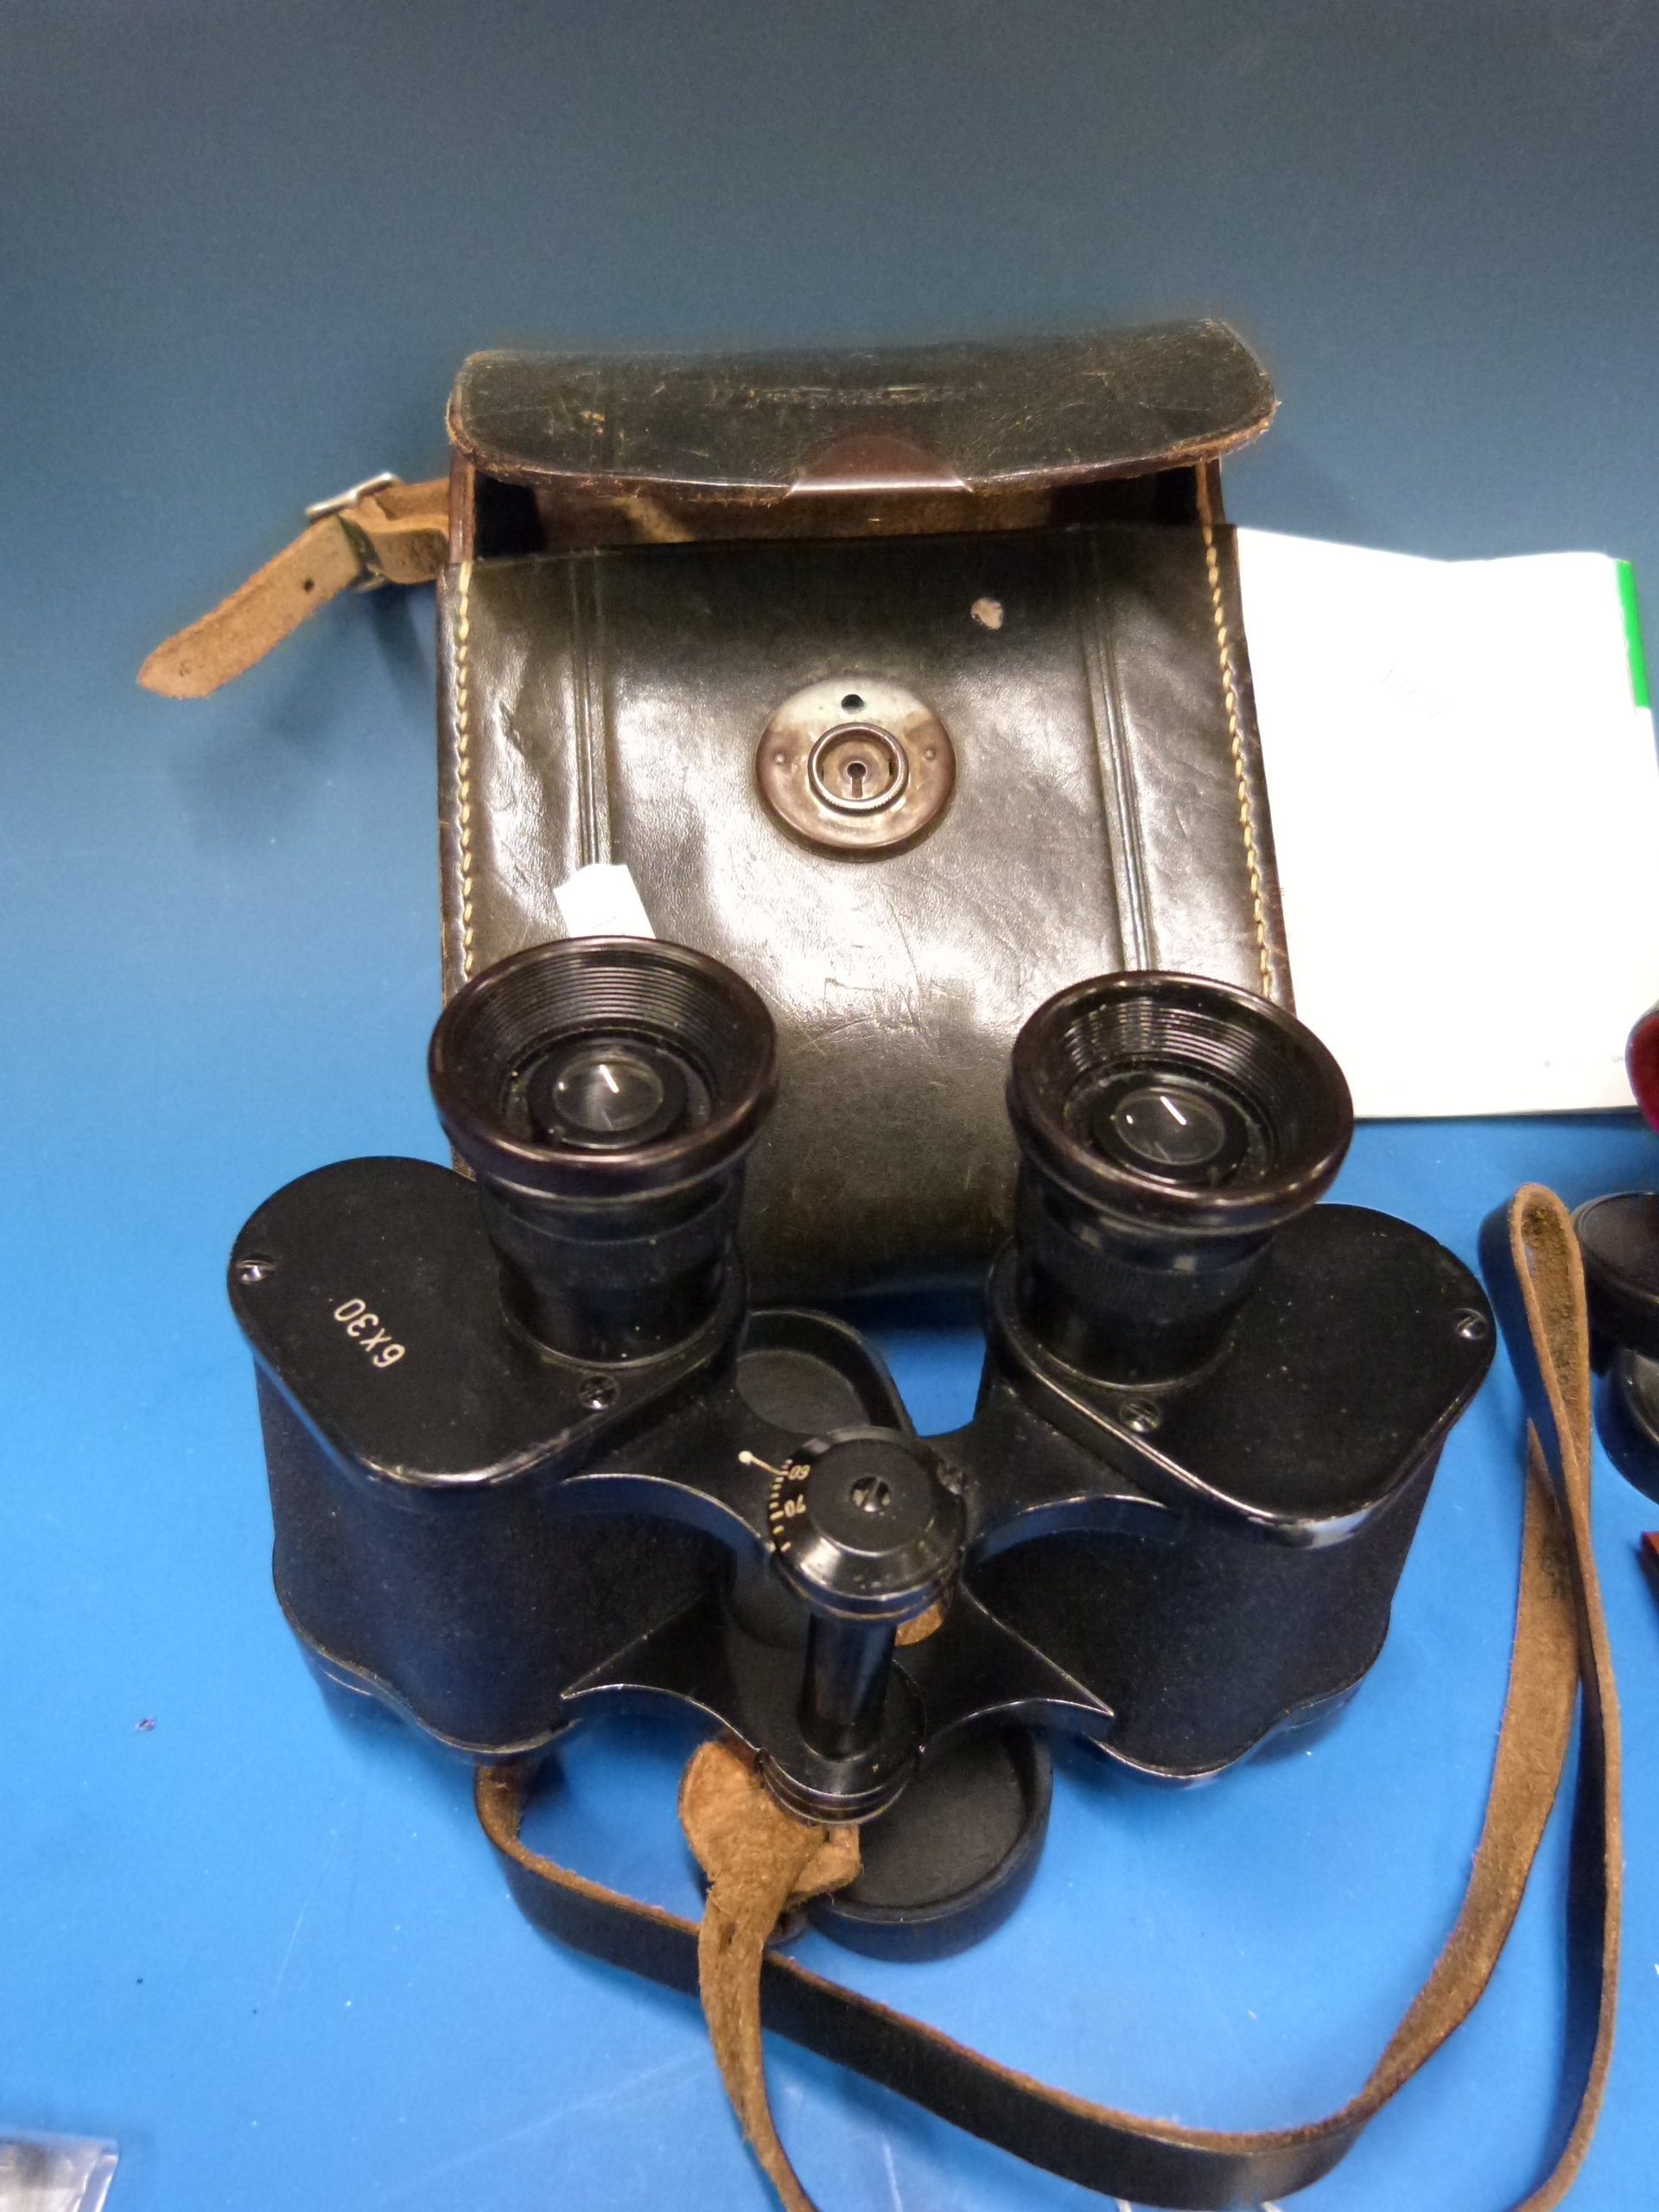 Collection of cameras, lenses and binocu - Image 13 of 13